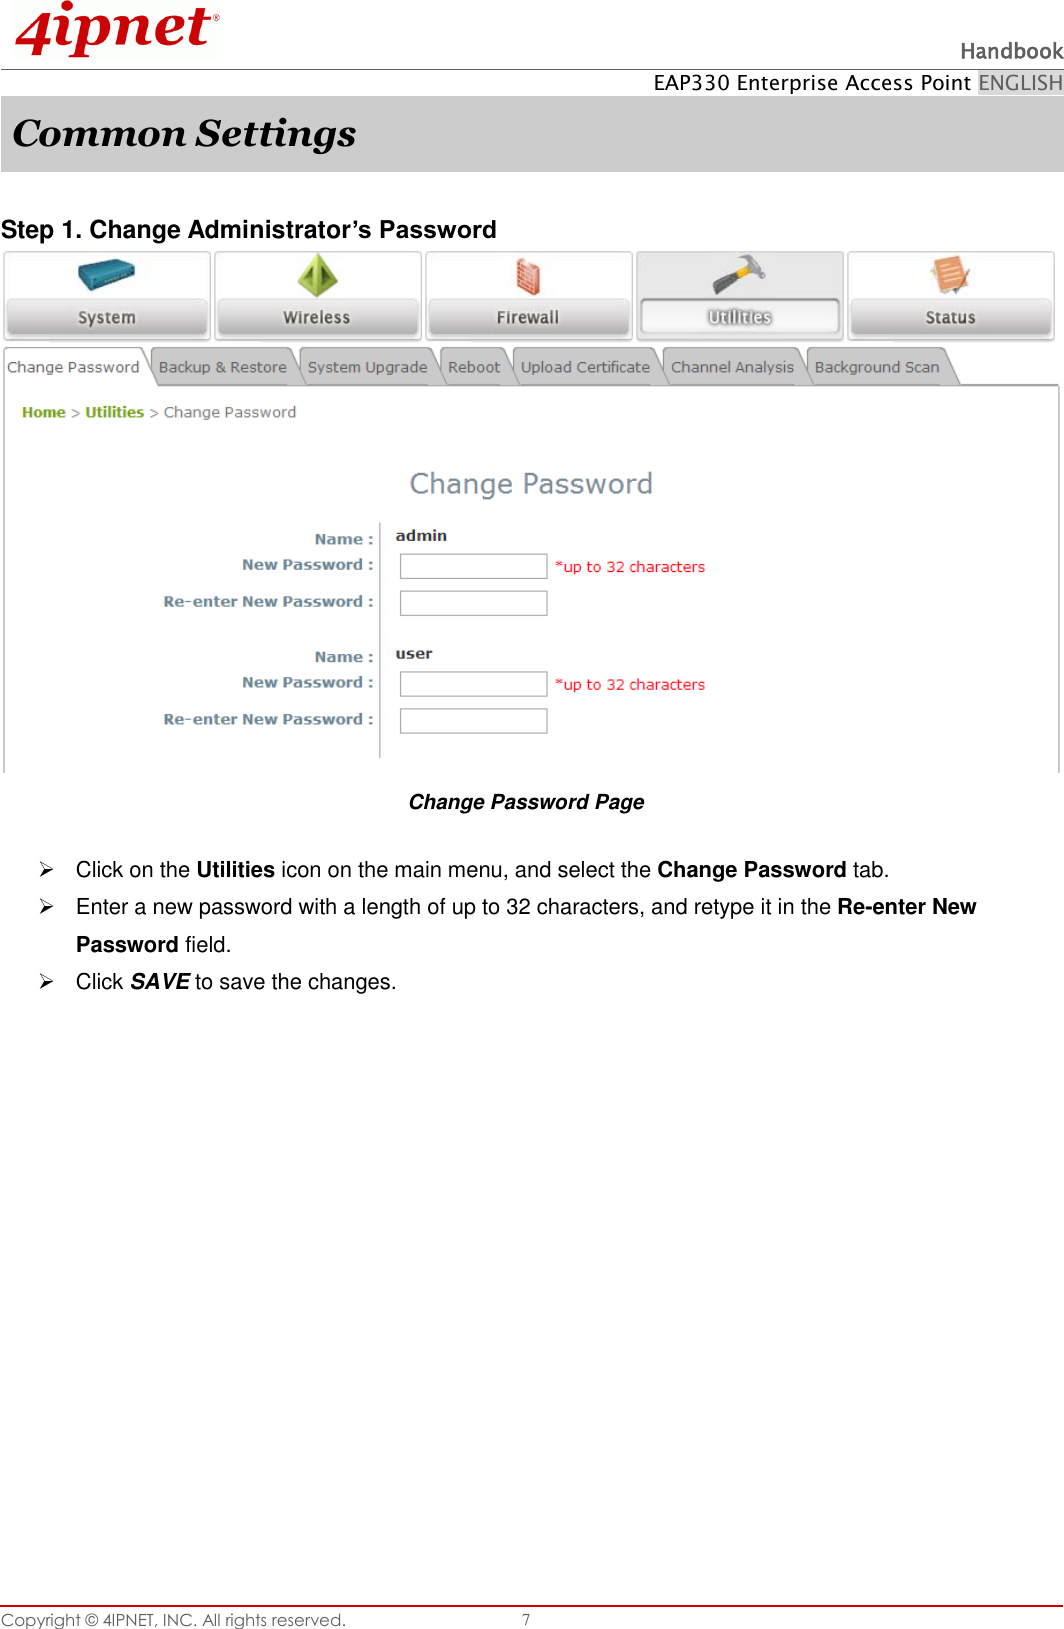  Handbook EAP330 Enterprise Access Point ENGLISH Copyright ©  4IPNET, INC. All rights reserved.   7 Common Settings  Step 1. Change Administrator’s Password  Change Password Page   Click on the Utilities icon on the main menu, and select the Change Password tab.   Enter a new password with a length of up to 32 characters, and retype it in the Re-enter New Password field.   Click SAVE to save the changes.   